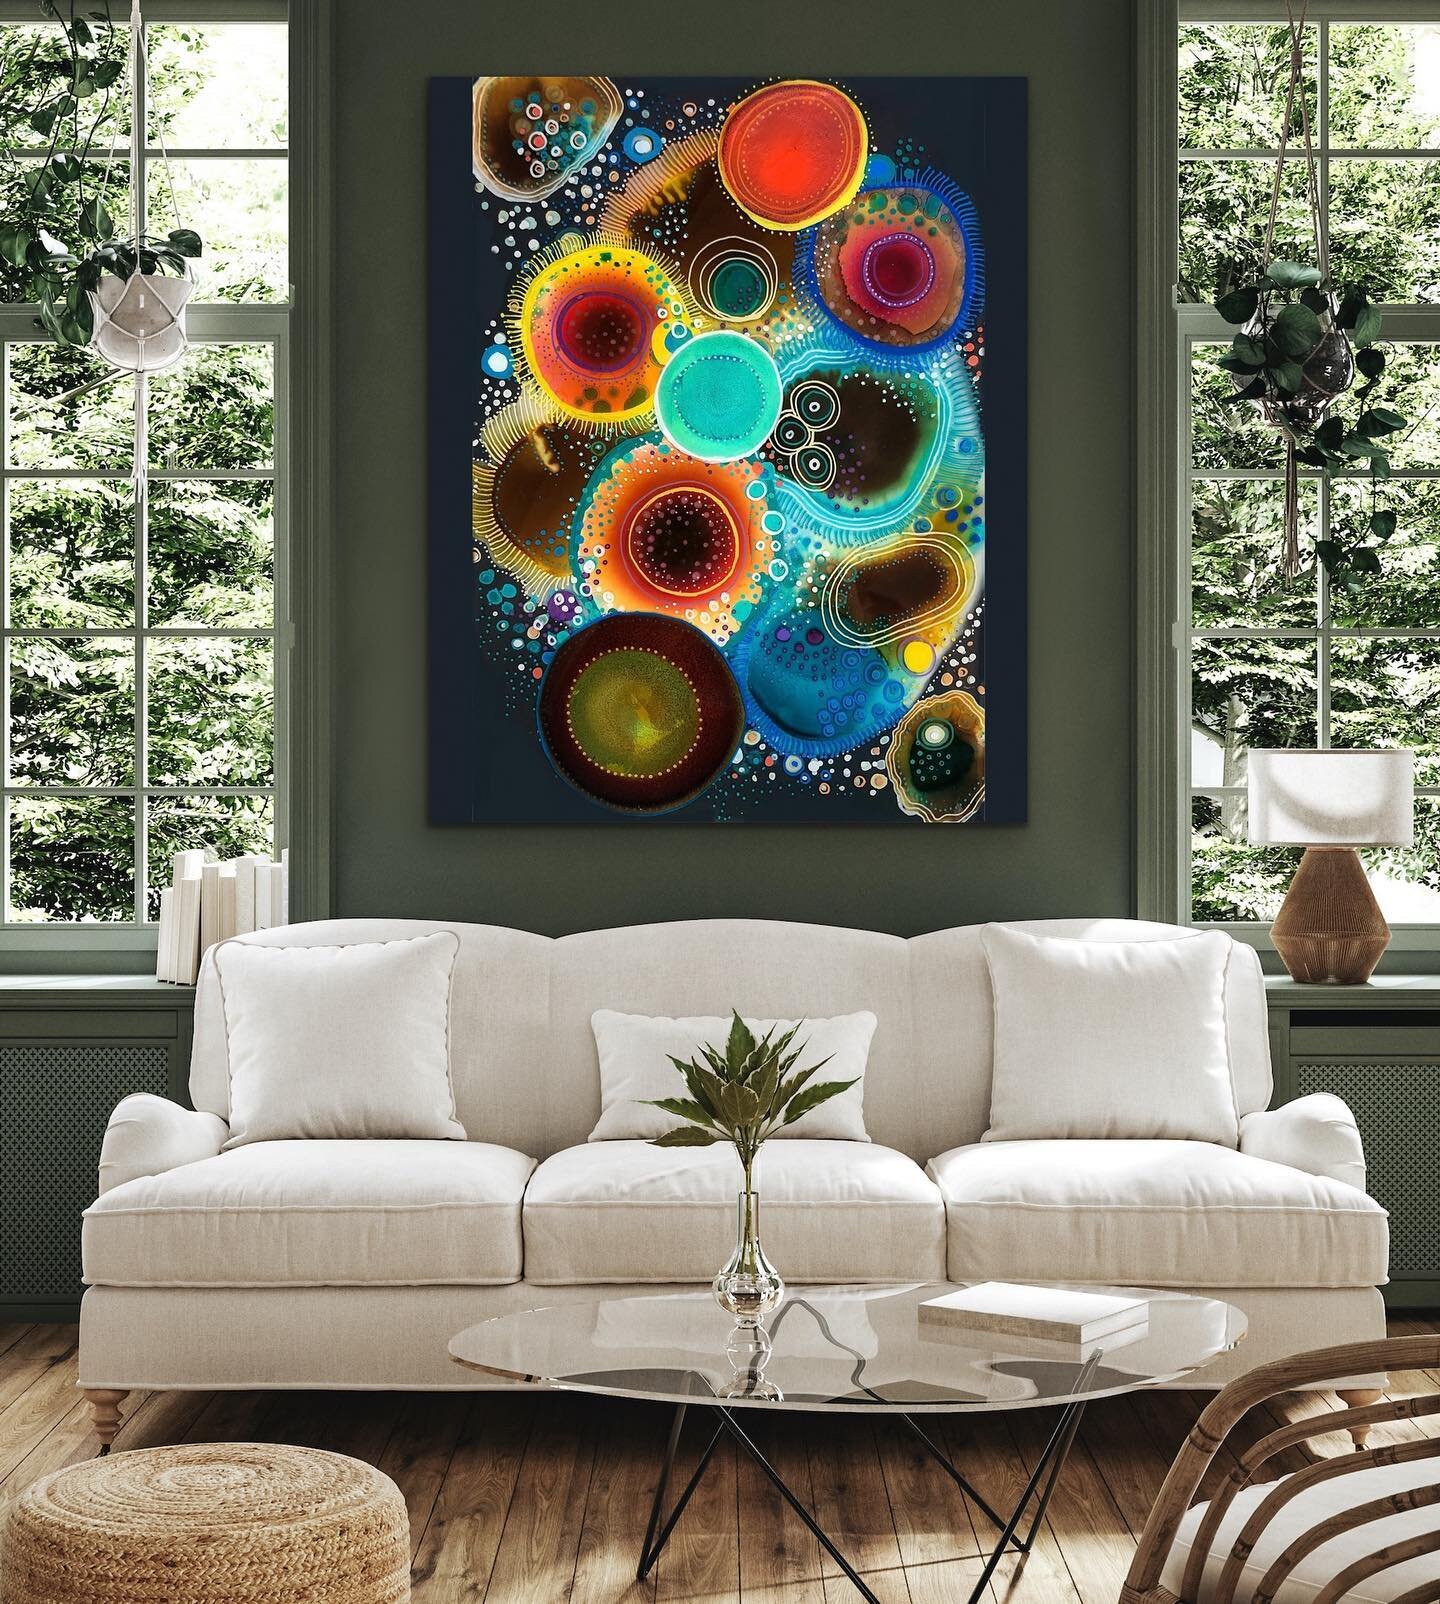 A little piece of quantum realm bubbles of of creation. This one has lots of layers of @artresin and dreamy depth that invite you view it through a few different lenses of imagination. 

#ilovecolor #creativity #colortheory #colorcrush #imagination #